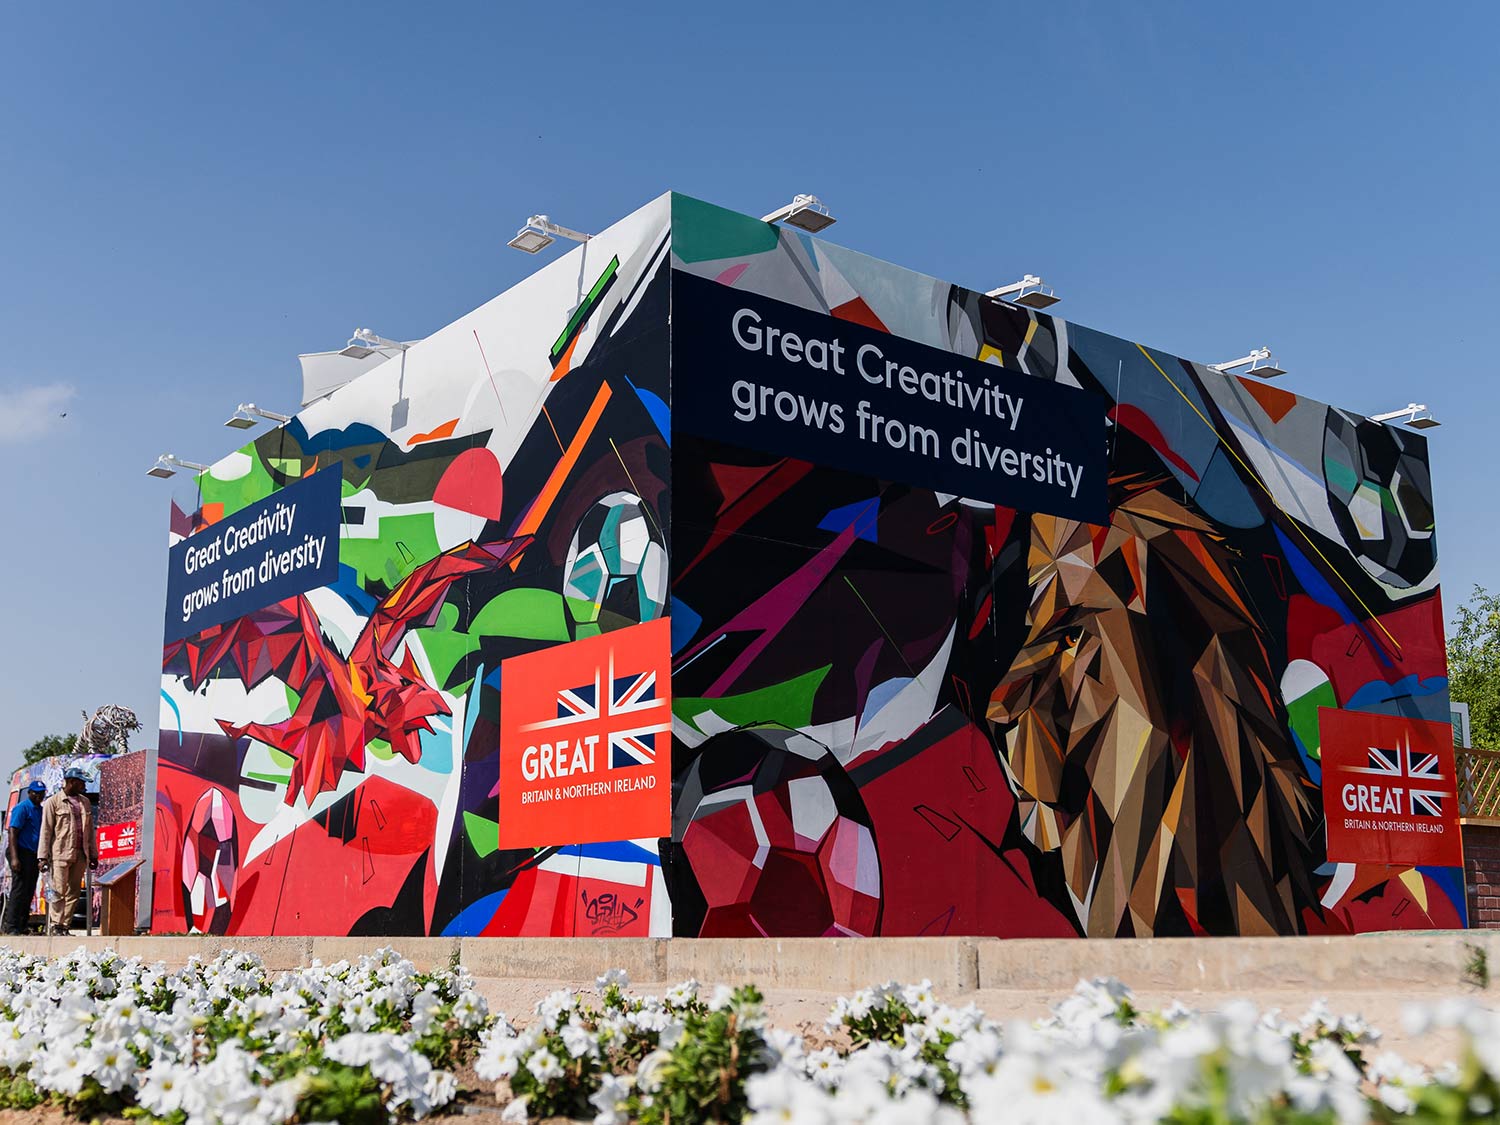 Dignitaries and Celebrities visit the UK Pavilion The Garden of GREAT at the FIFA World Cup